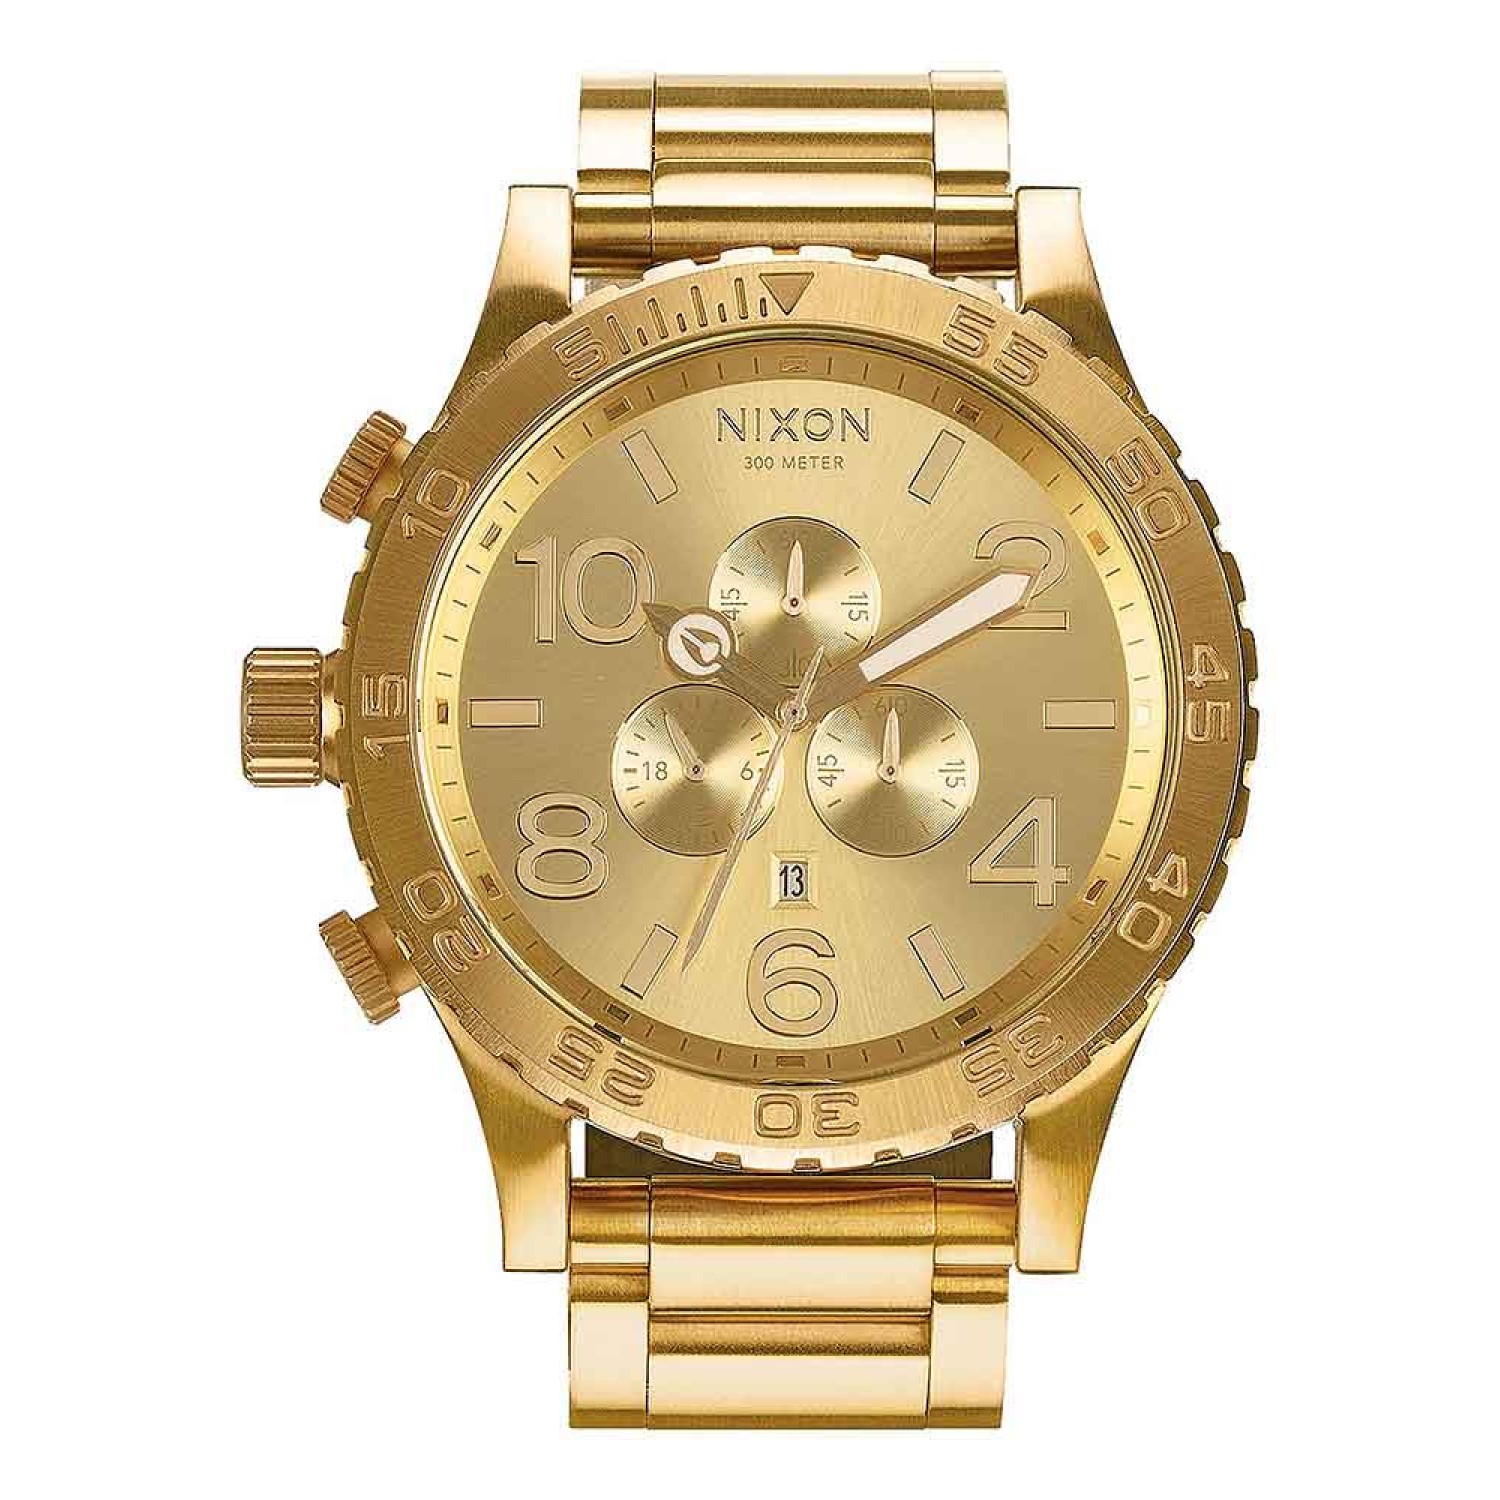 A083502 NIXON Gold Chronograph Watch A083502 NIXON Watches Auckland |Nixon watches are often chosen as gifts due to their stylish designs and functionality.